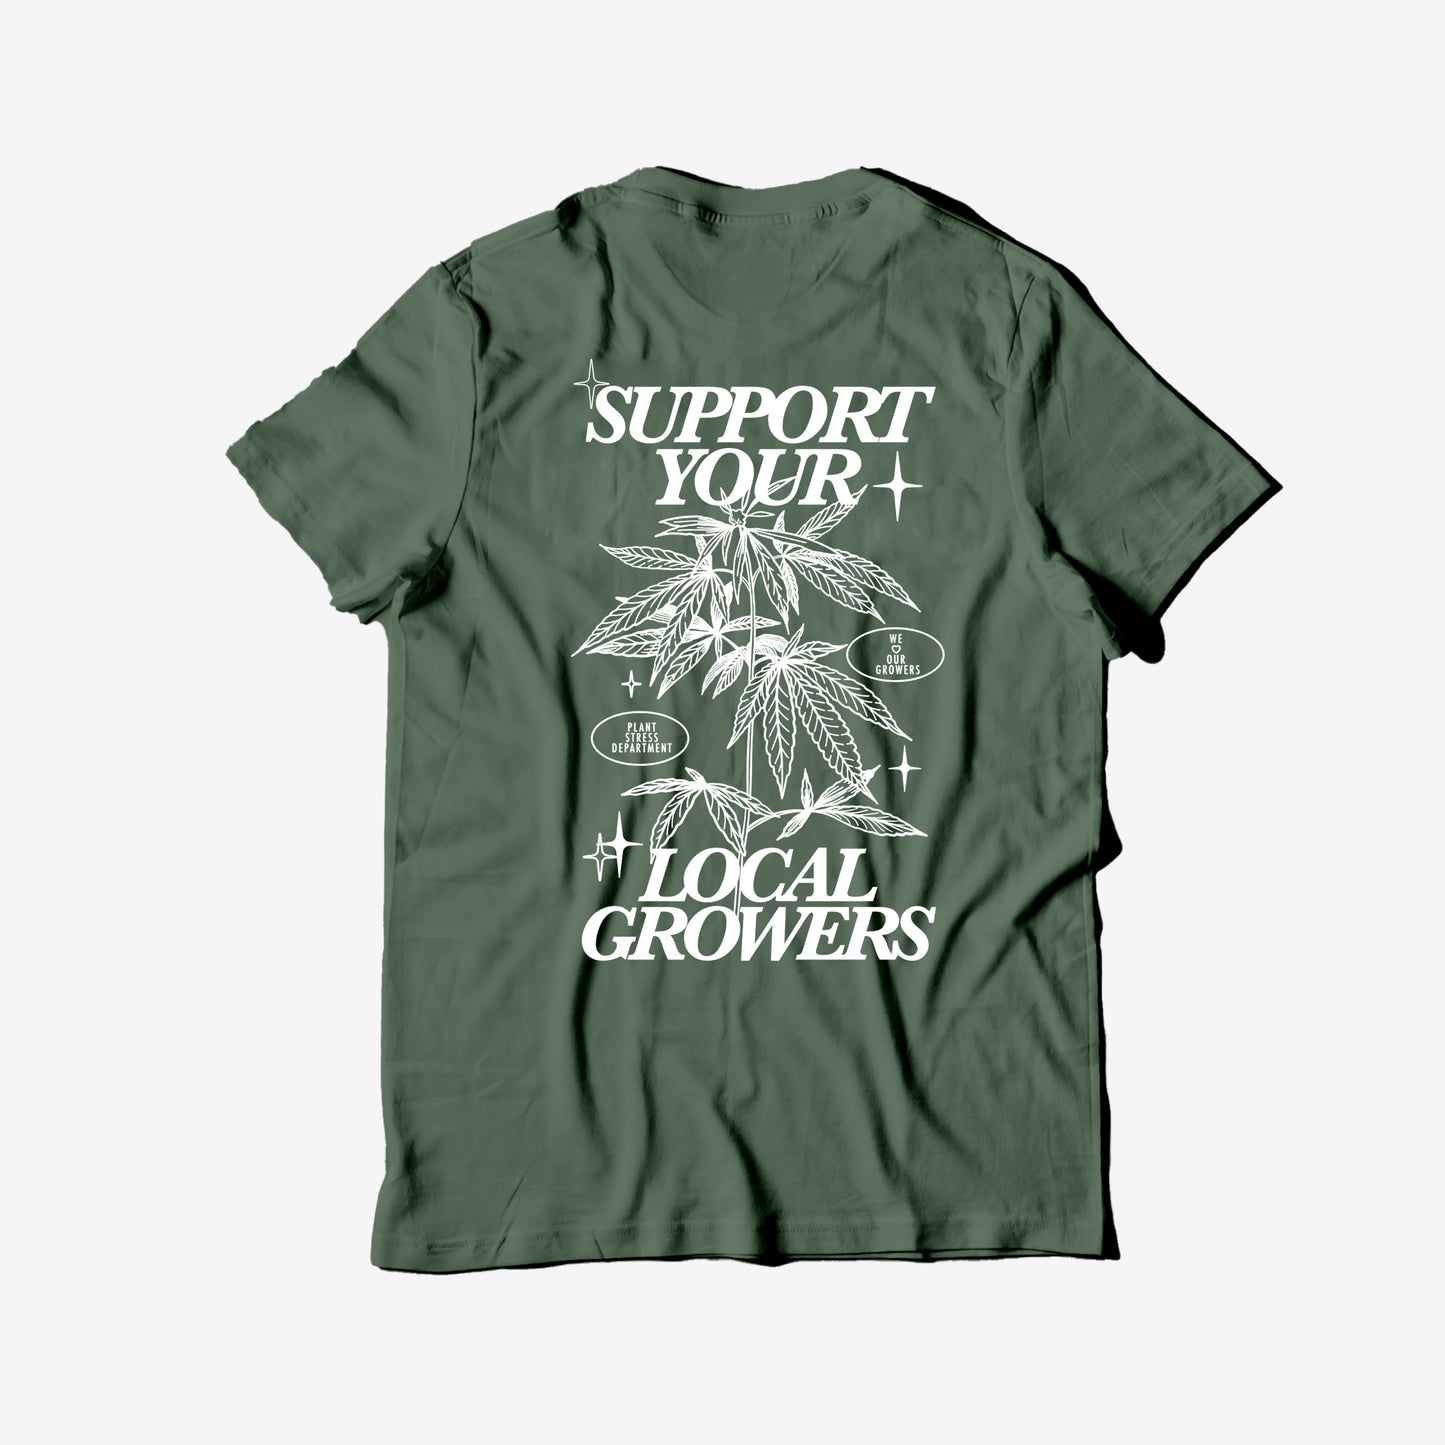 'Support Your Local Growers' - Garment-Dyed Heavyweight T-Shirt